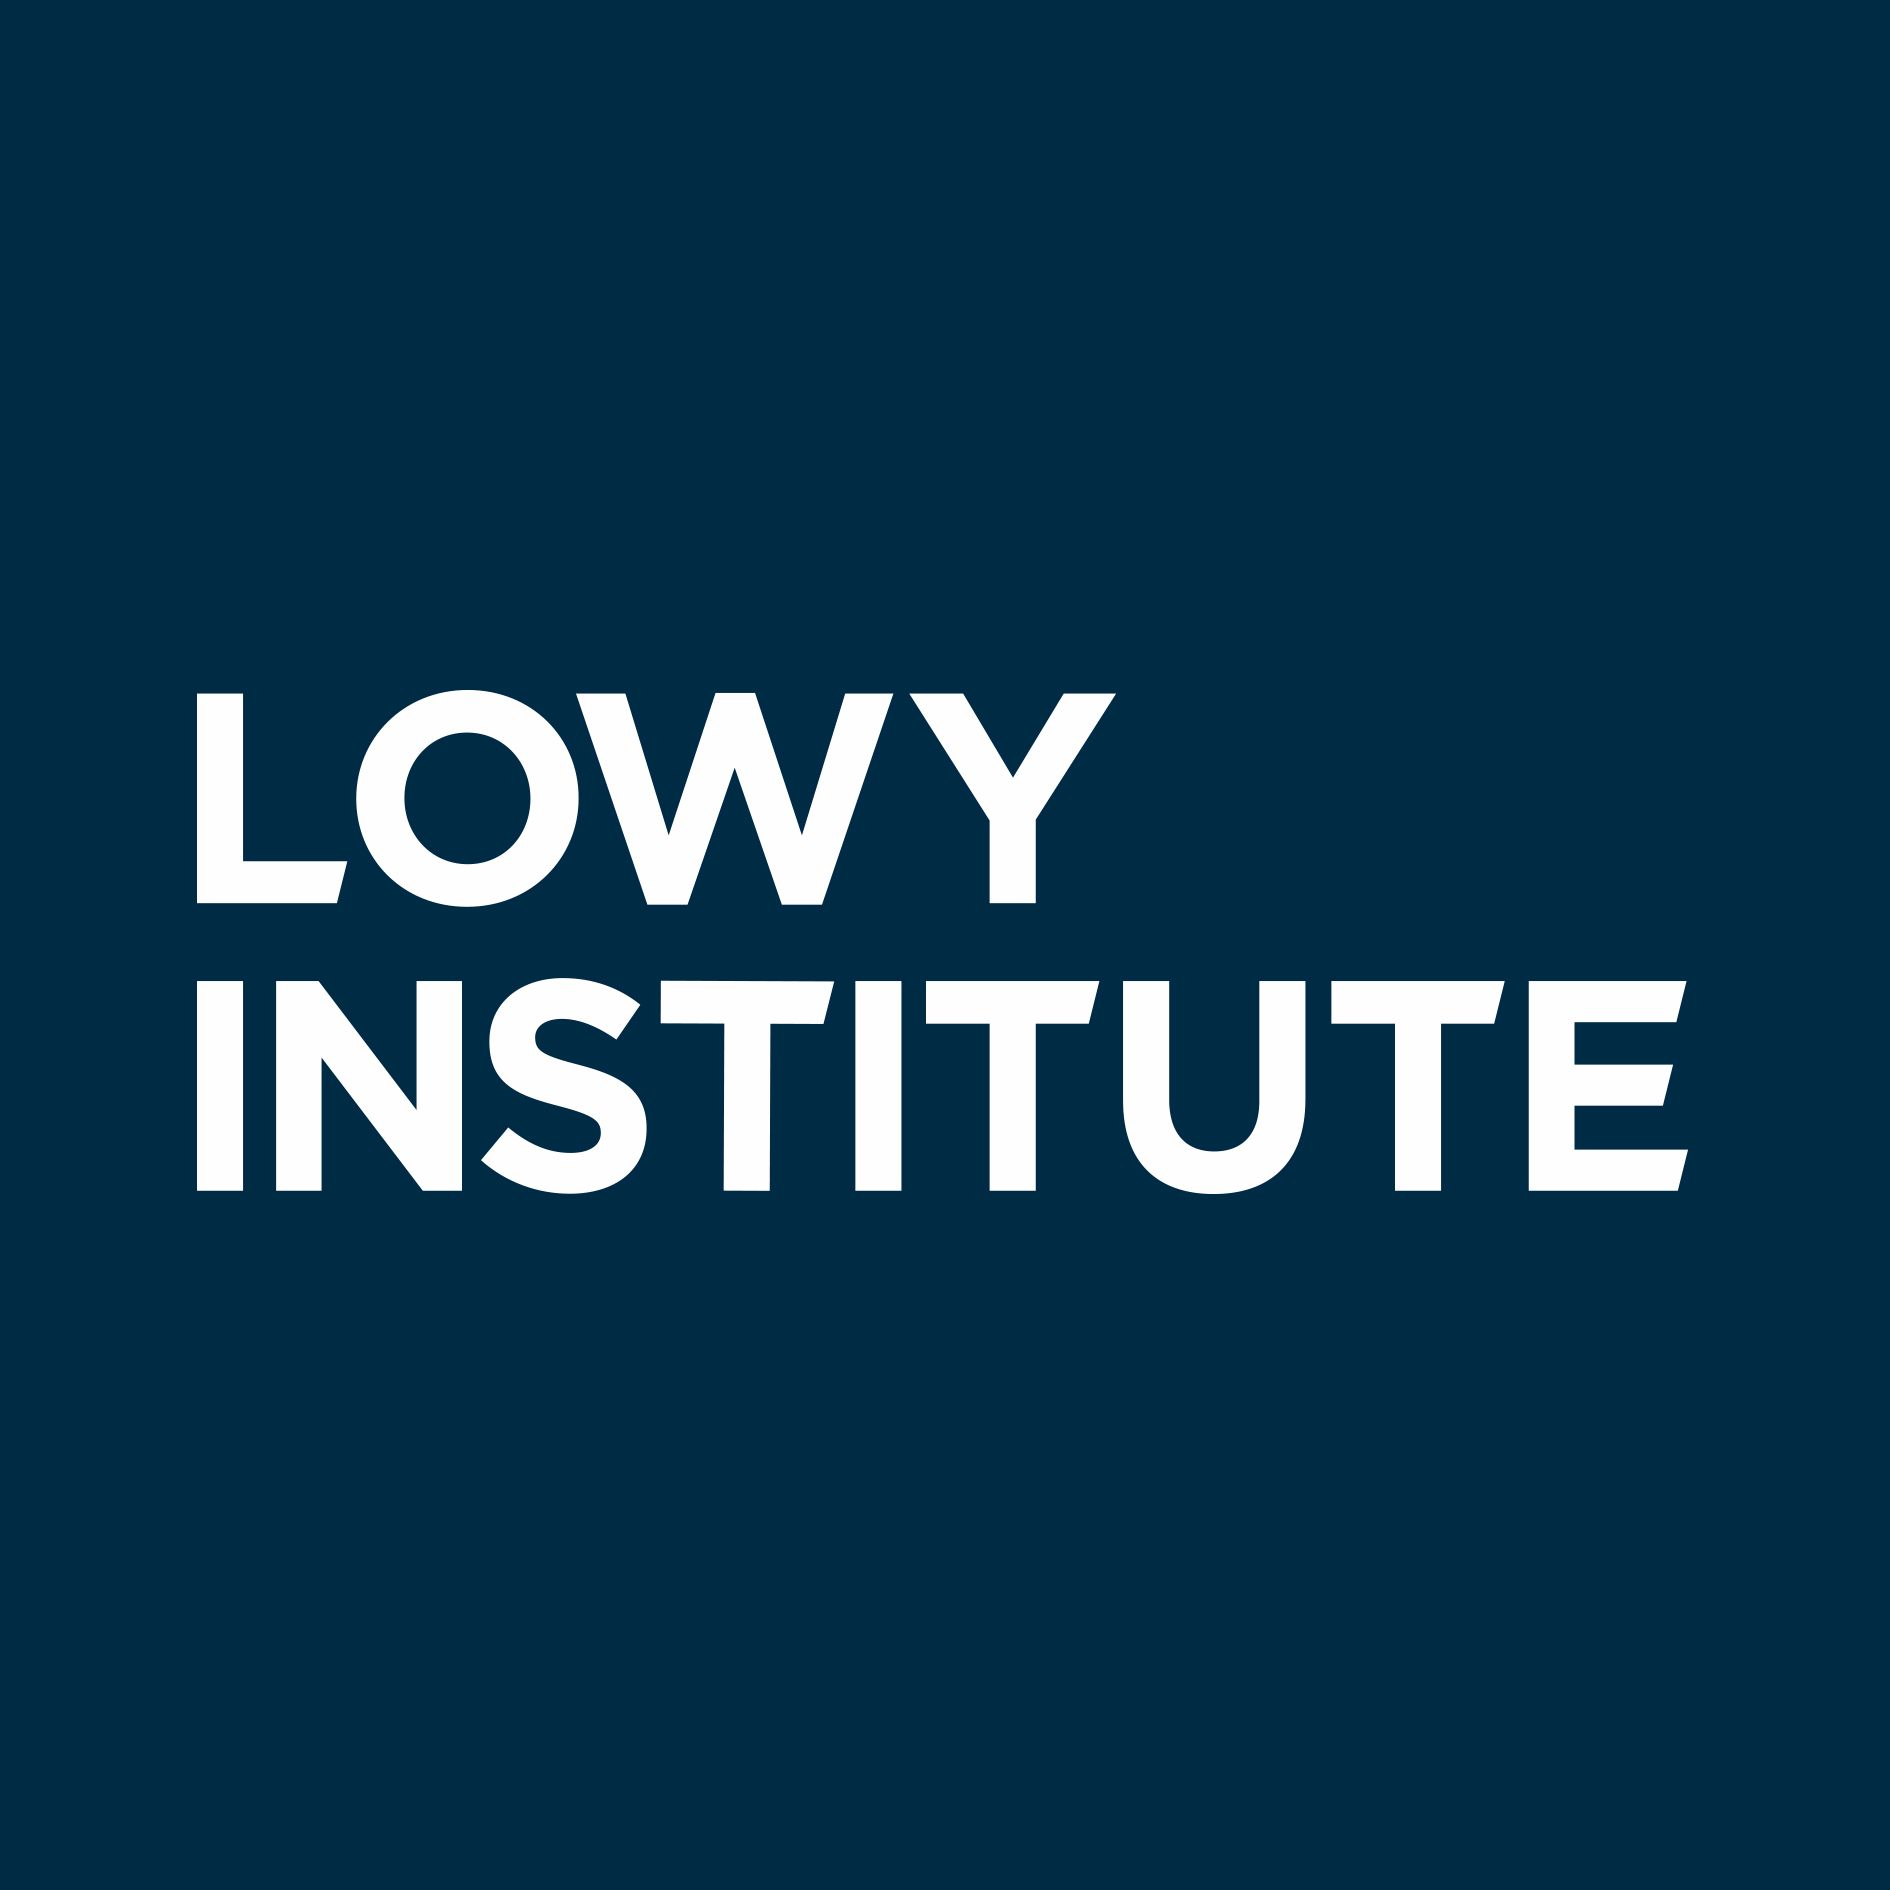 Event: 2021 Lowy Lecture — Jake Sullivan, US National Security Adviser